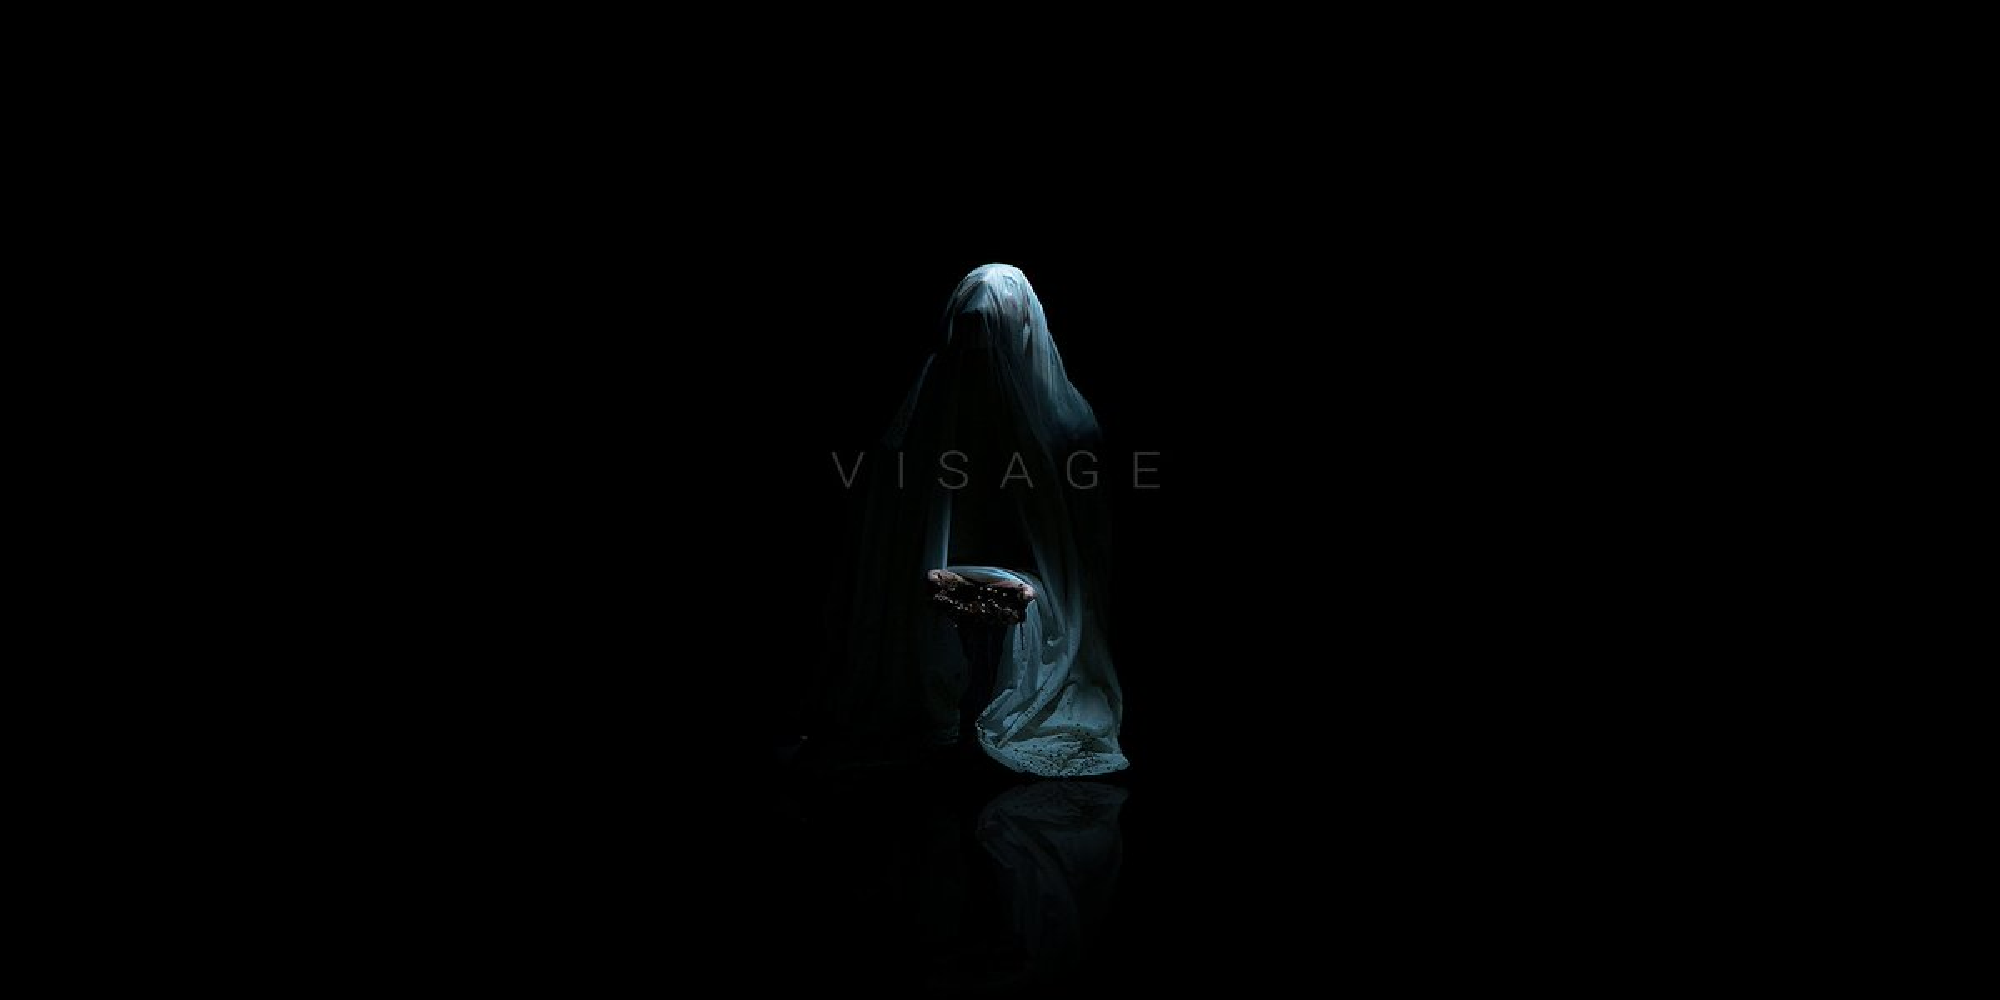 Visage Video Game Title And Cover